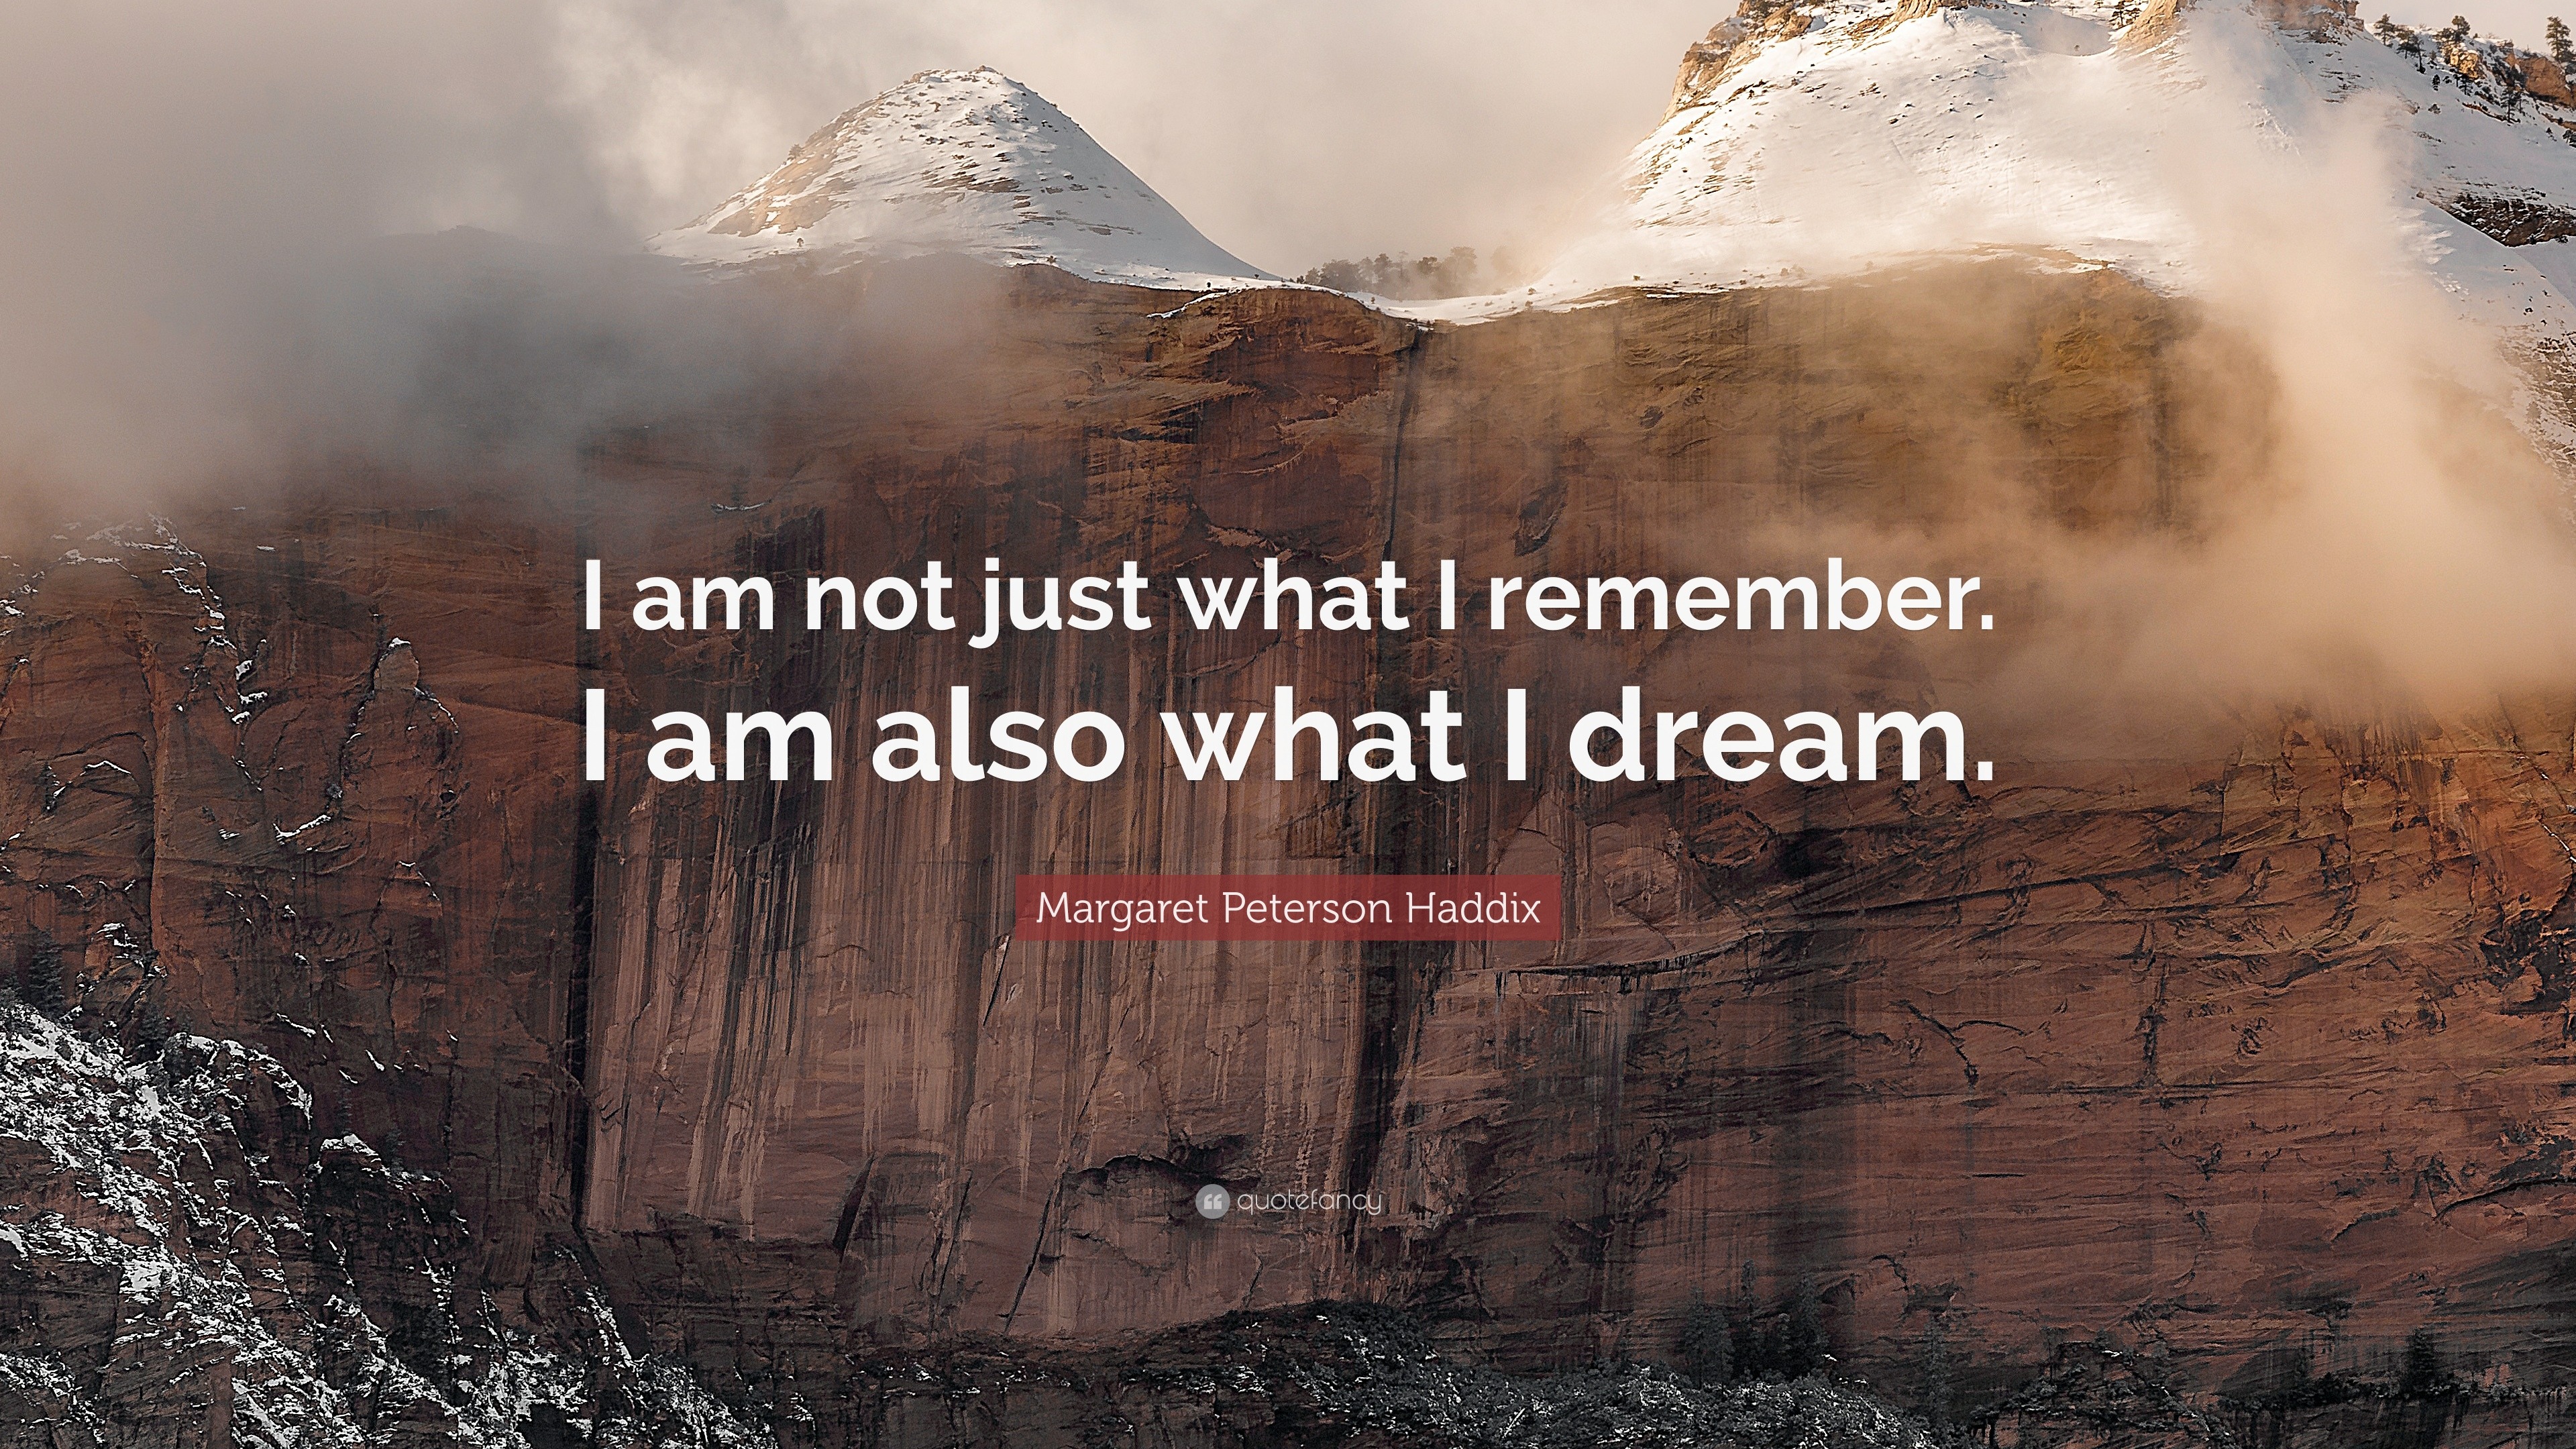 Margaret Peterson Haddix Quote: “I am not just what I remember. I am ...